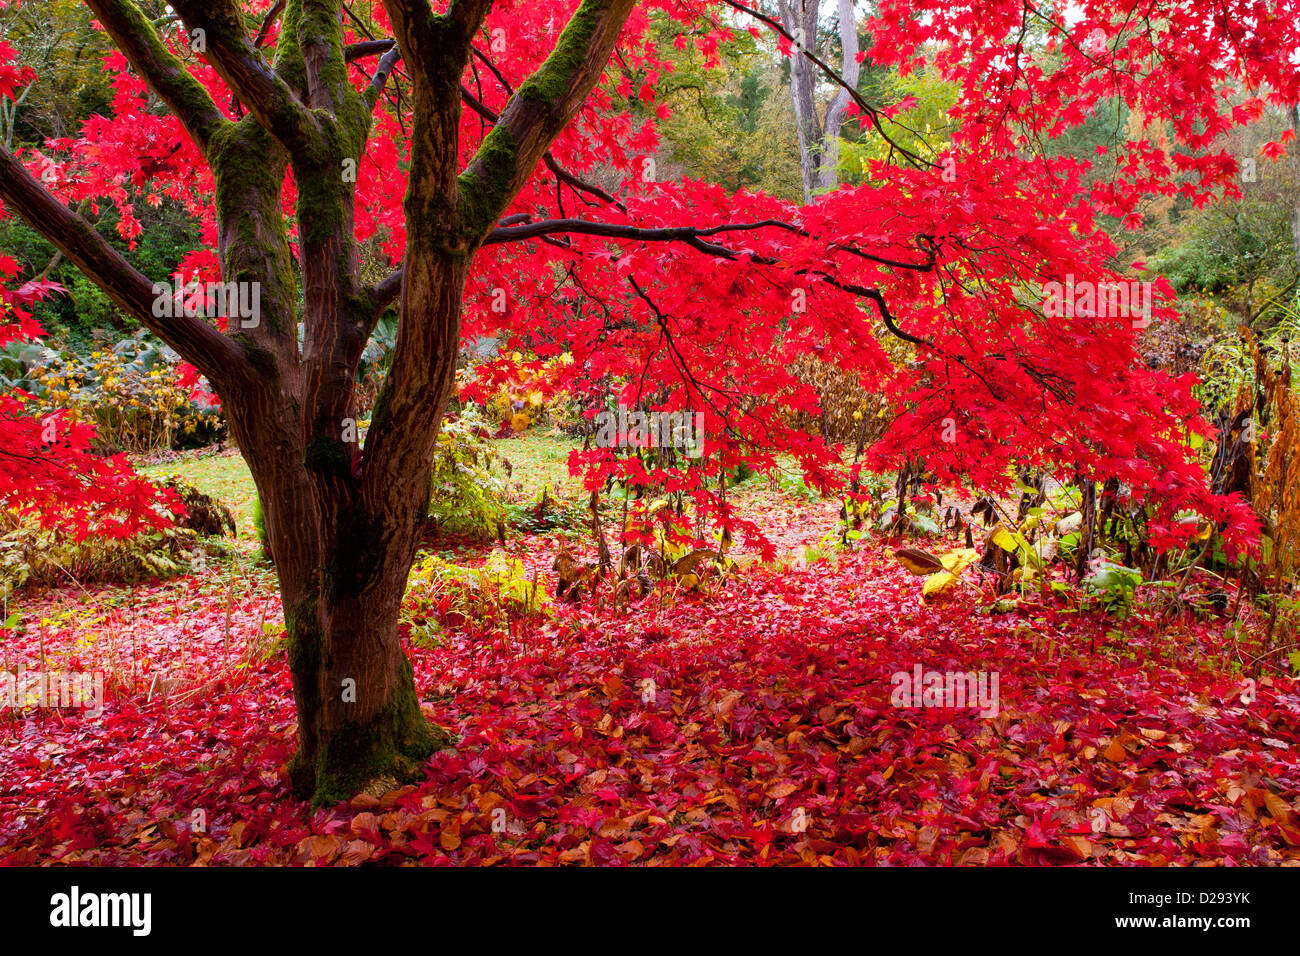 Japanese maple (Acer palmatum) tree in a woodland garden in Autumn. Gregynog Garden, Powys, Wales. October. Stock Photo